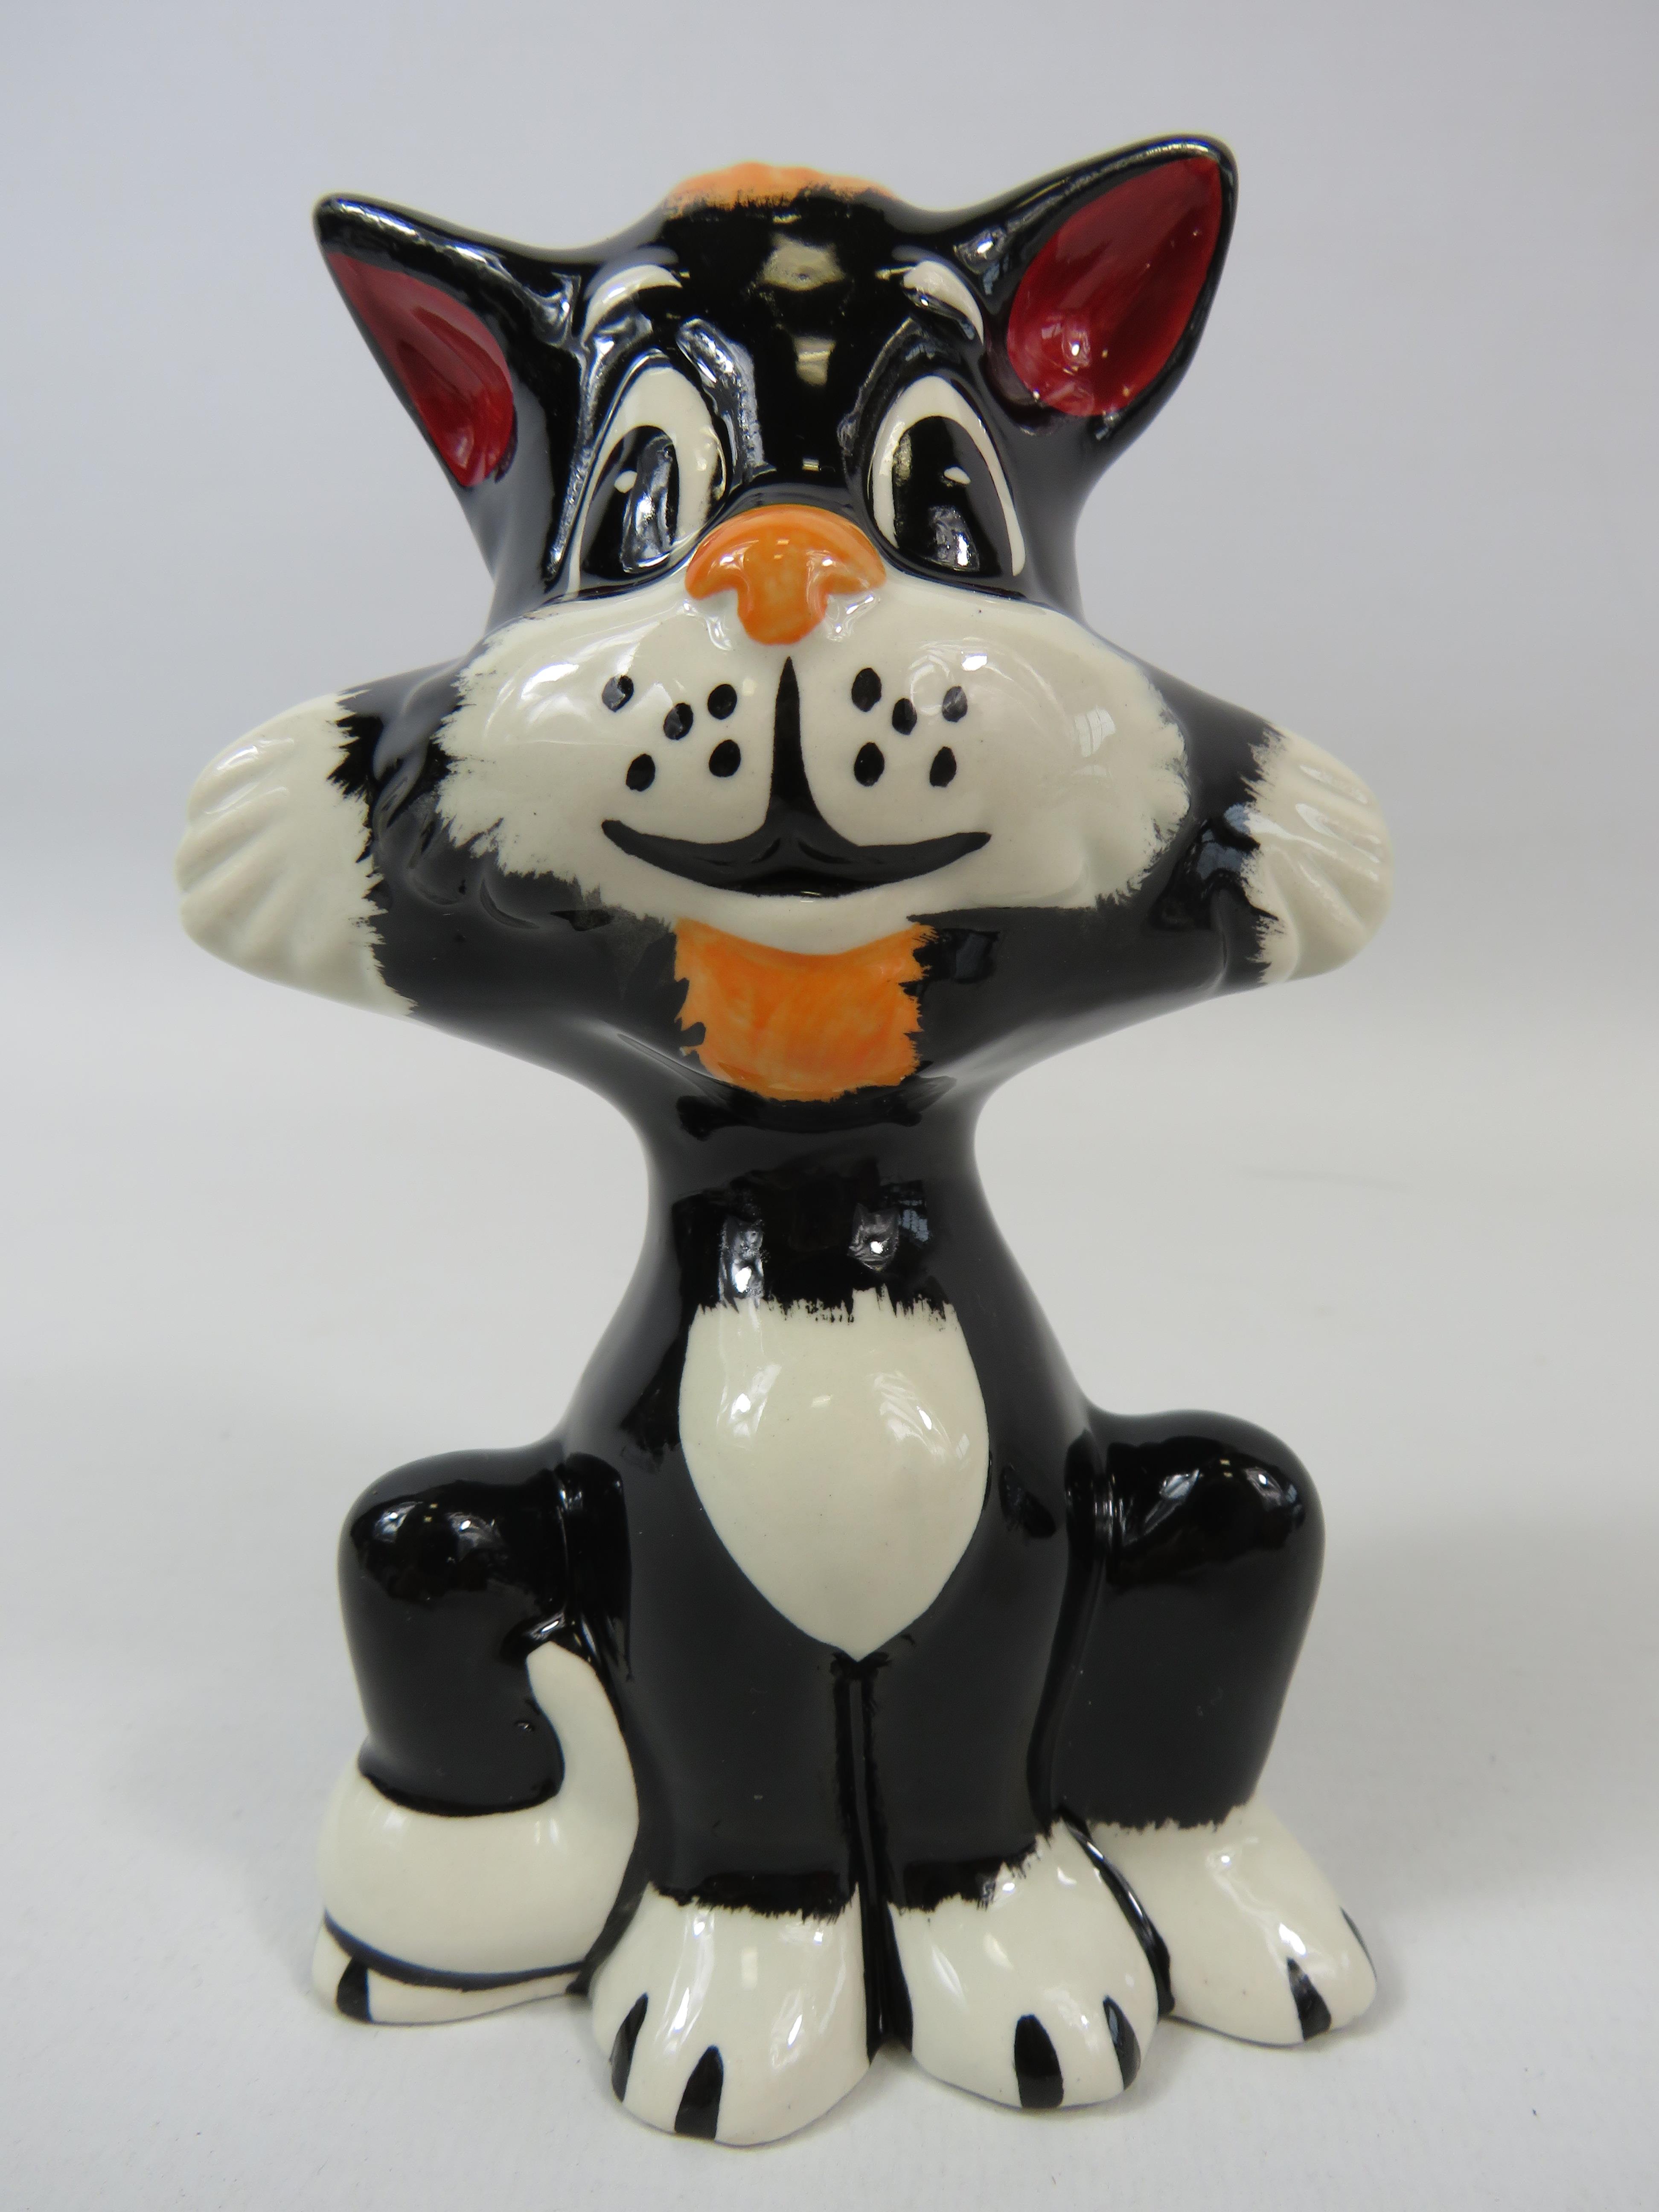 Lorna Bailey Inky the cat, approx 5" tall.